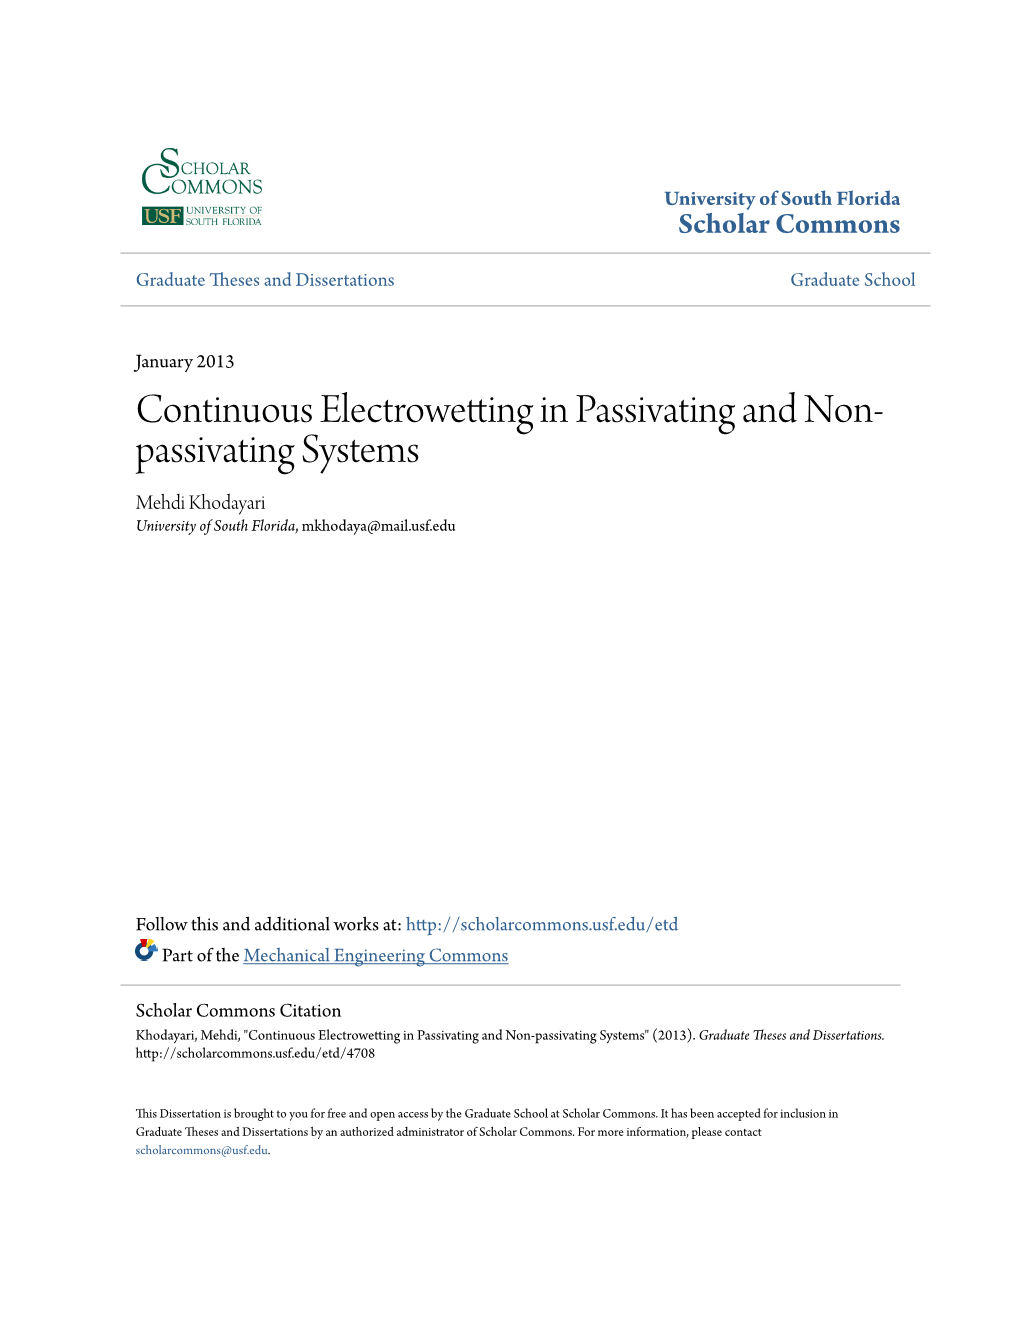 Continuous Electrowetting in Passivating and Non-Passivating Systems" (2013)